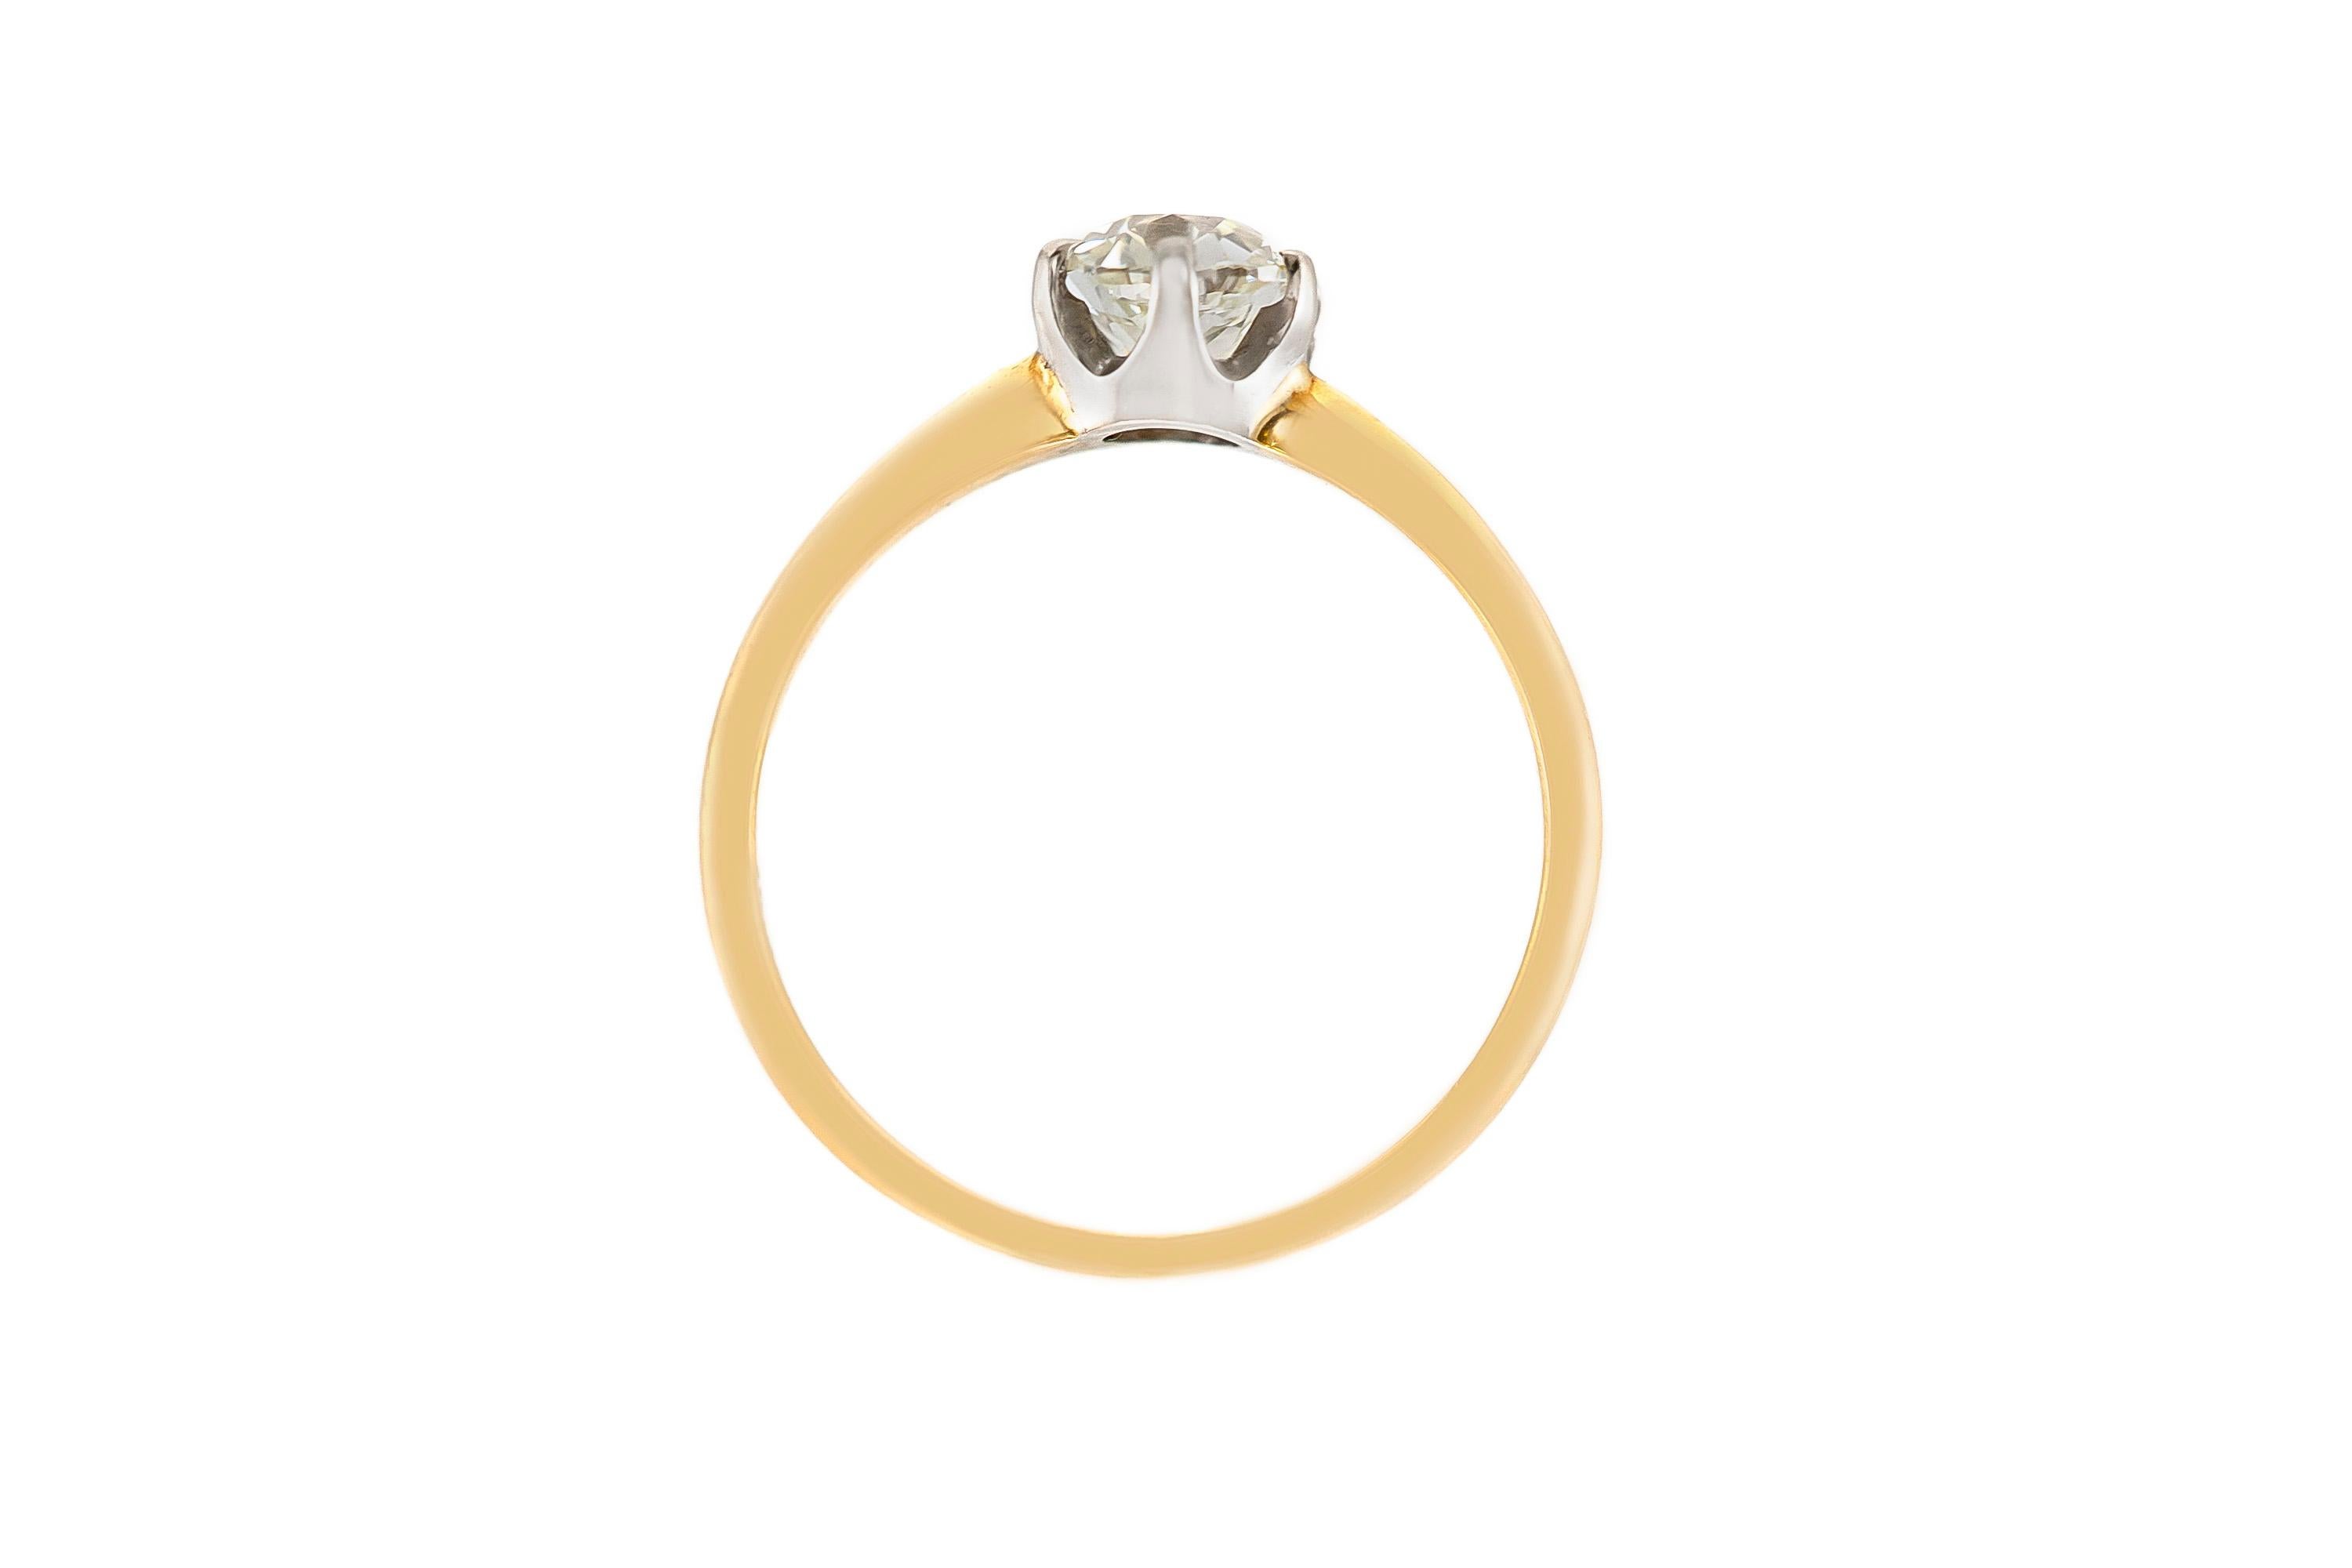 The beautiful engagement ring finely crafted in 18k yellow gold with one Gia center diamond weighing approximately total of 0.99 carat.
Color J       Clarity VS2
Circa 1930.